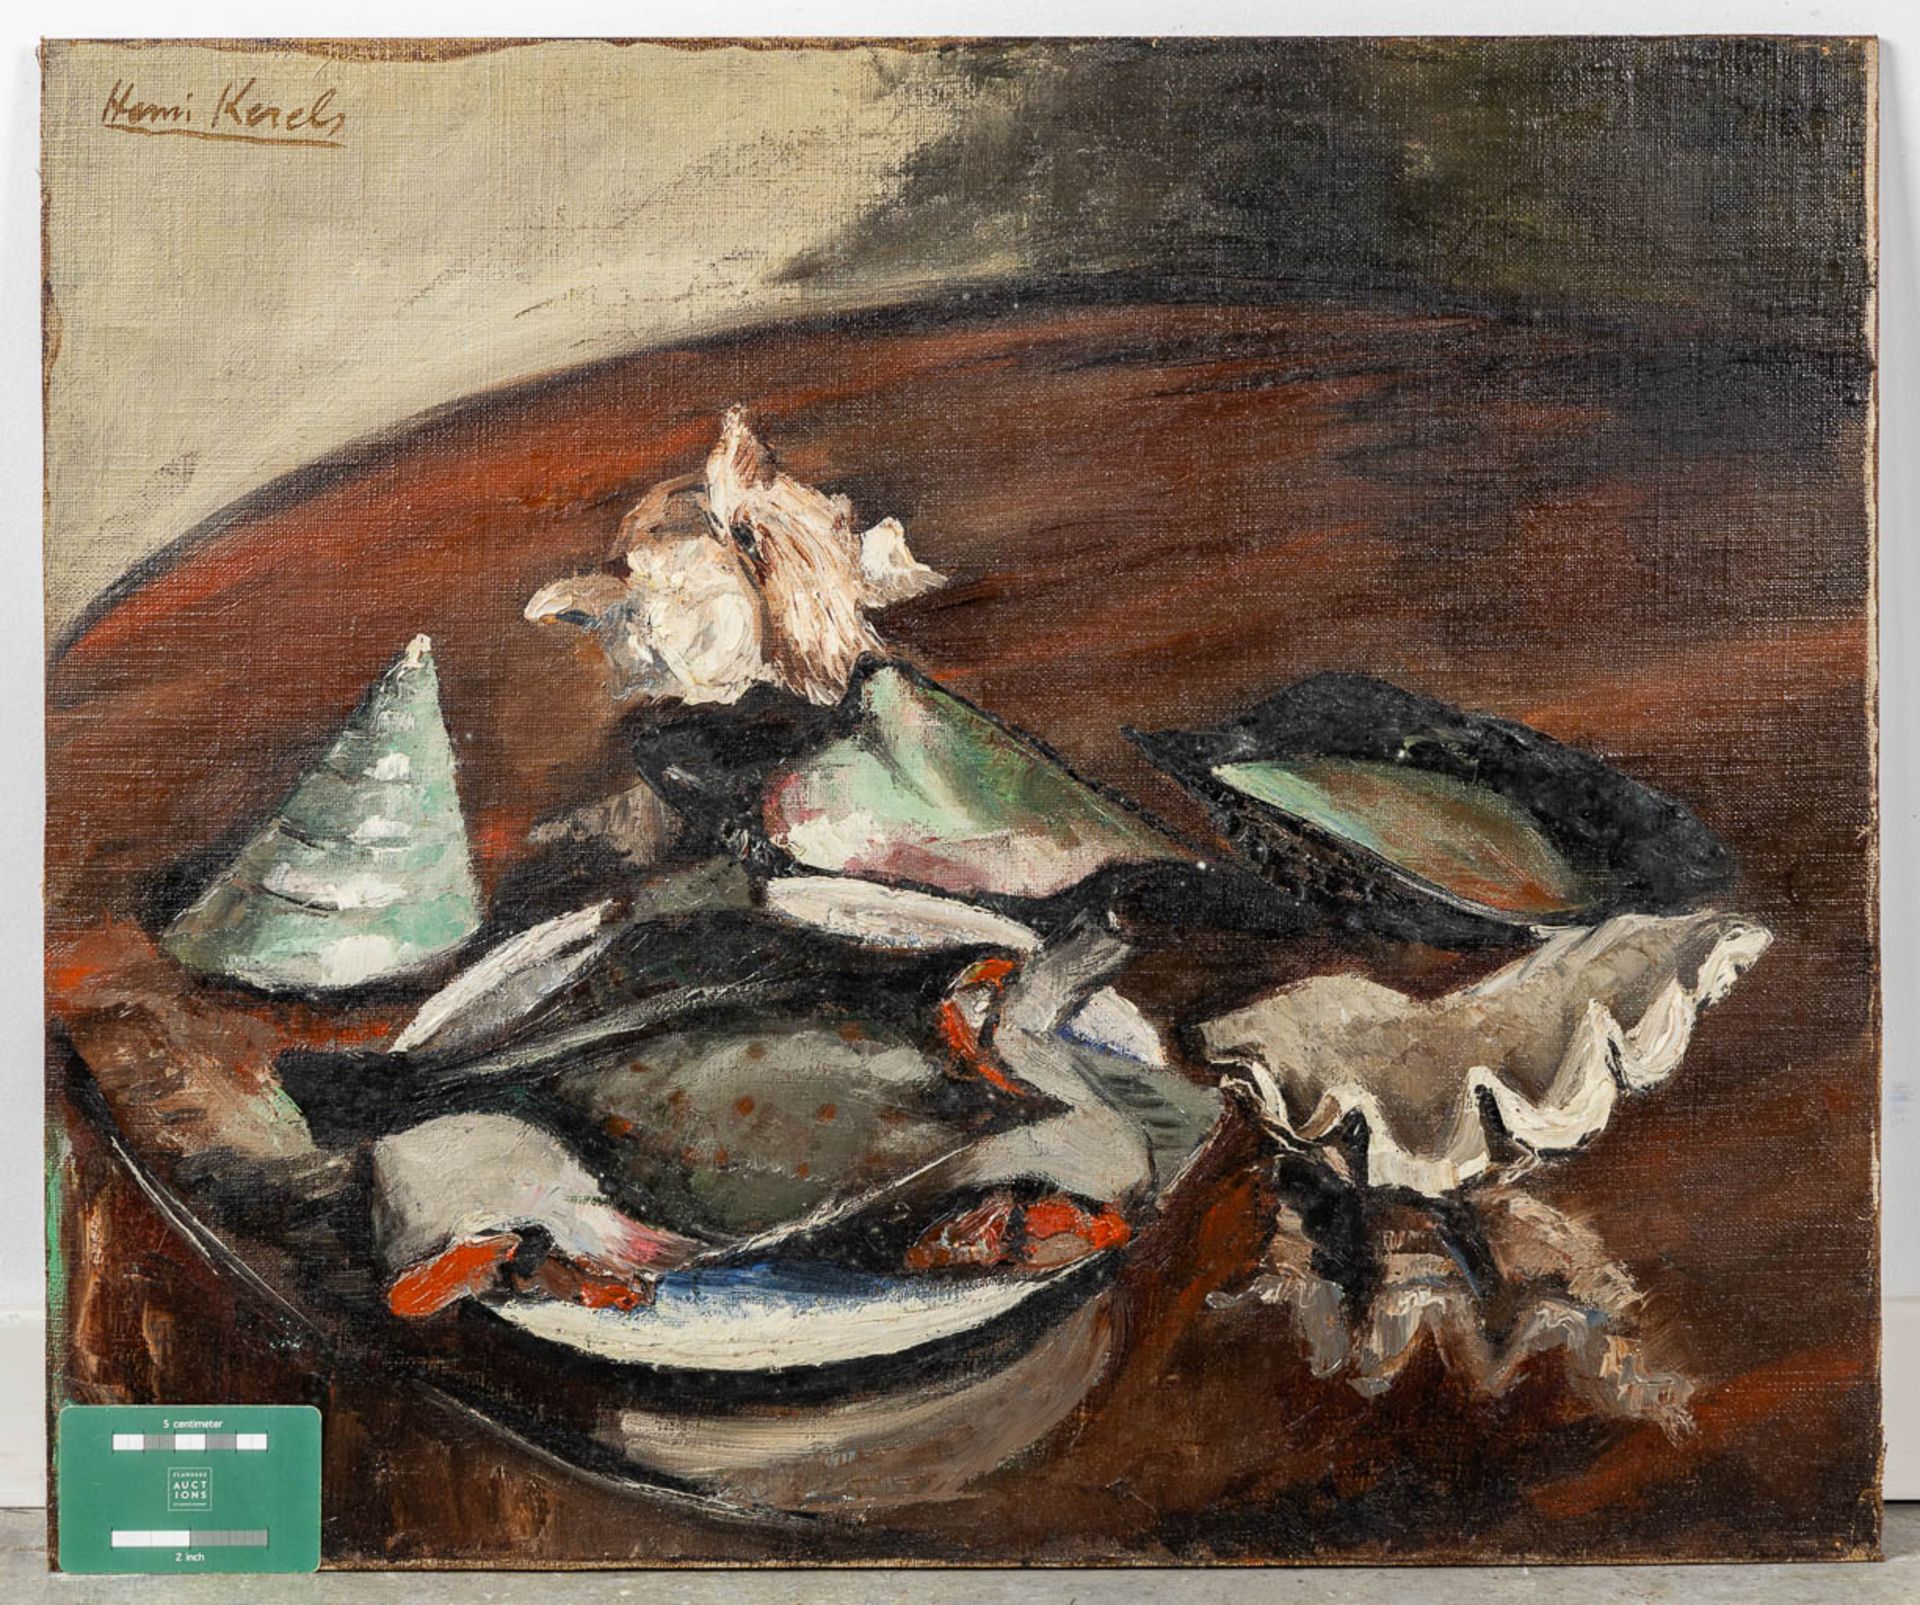 Henri KERELS (1896-1956) 'Still life with Mussles and Flatfish' oil on canvas. (W:60 x H:50 cm) - Image 2 of 6